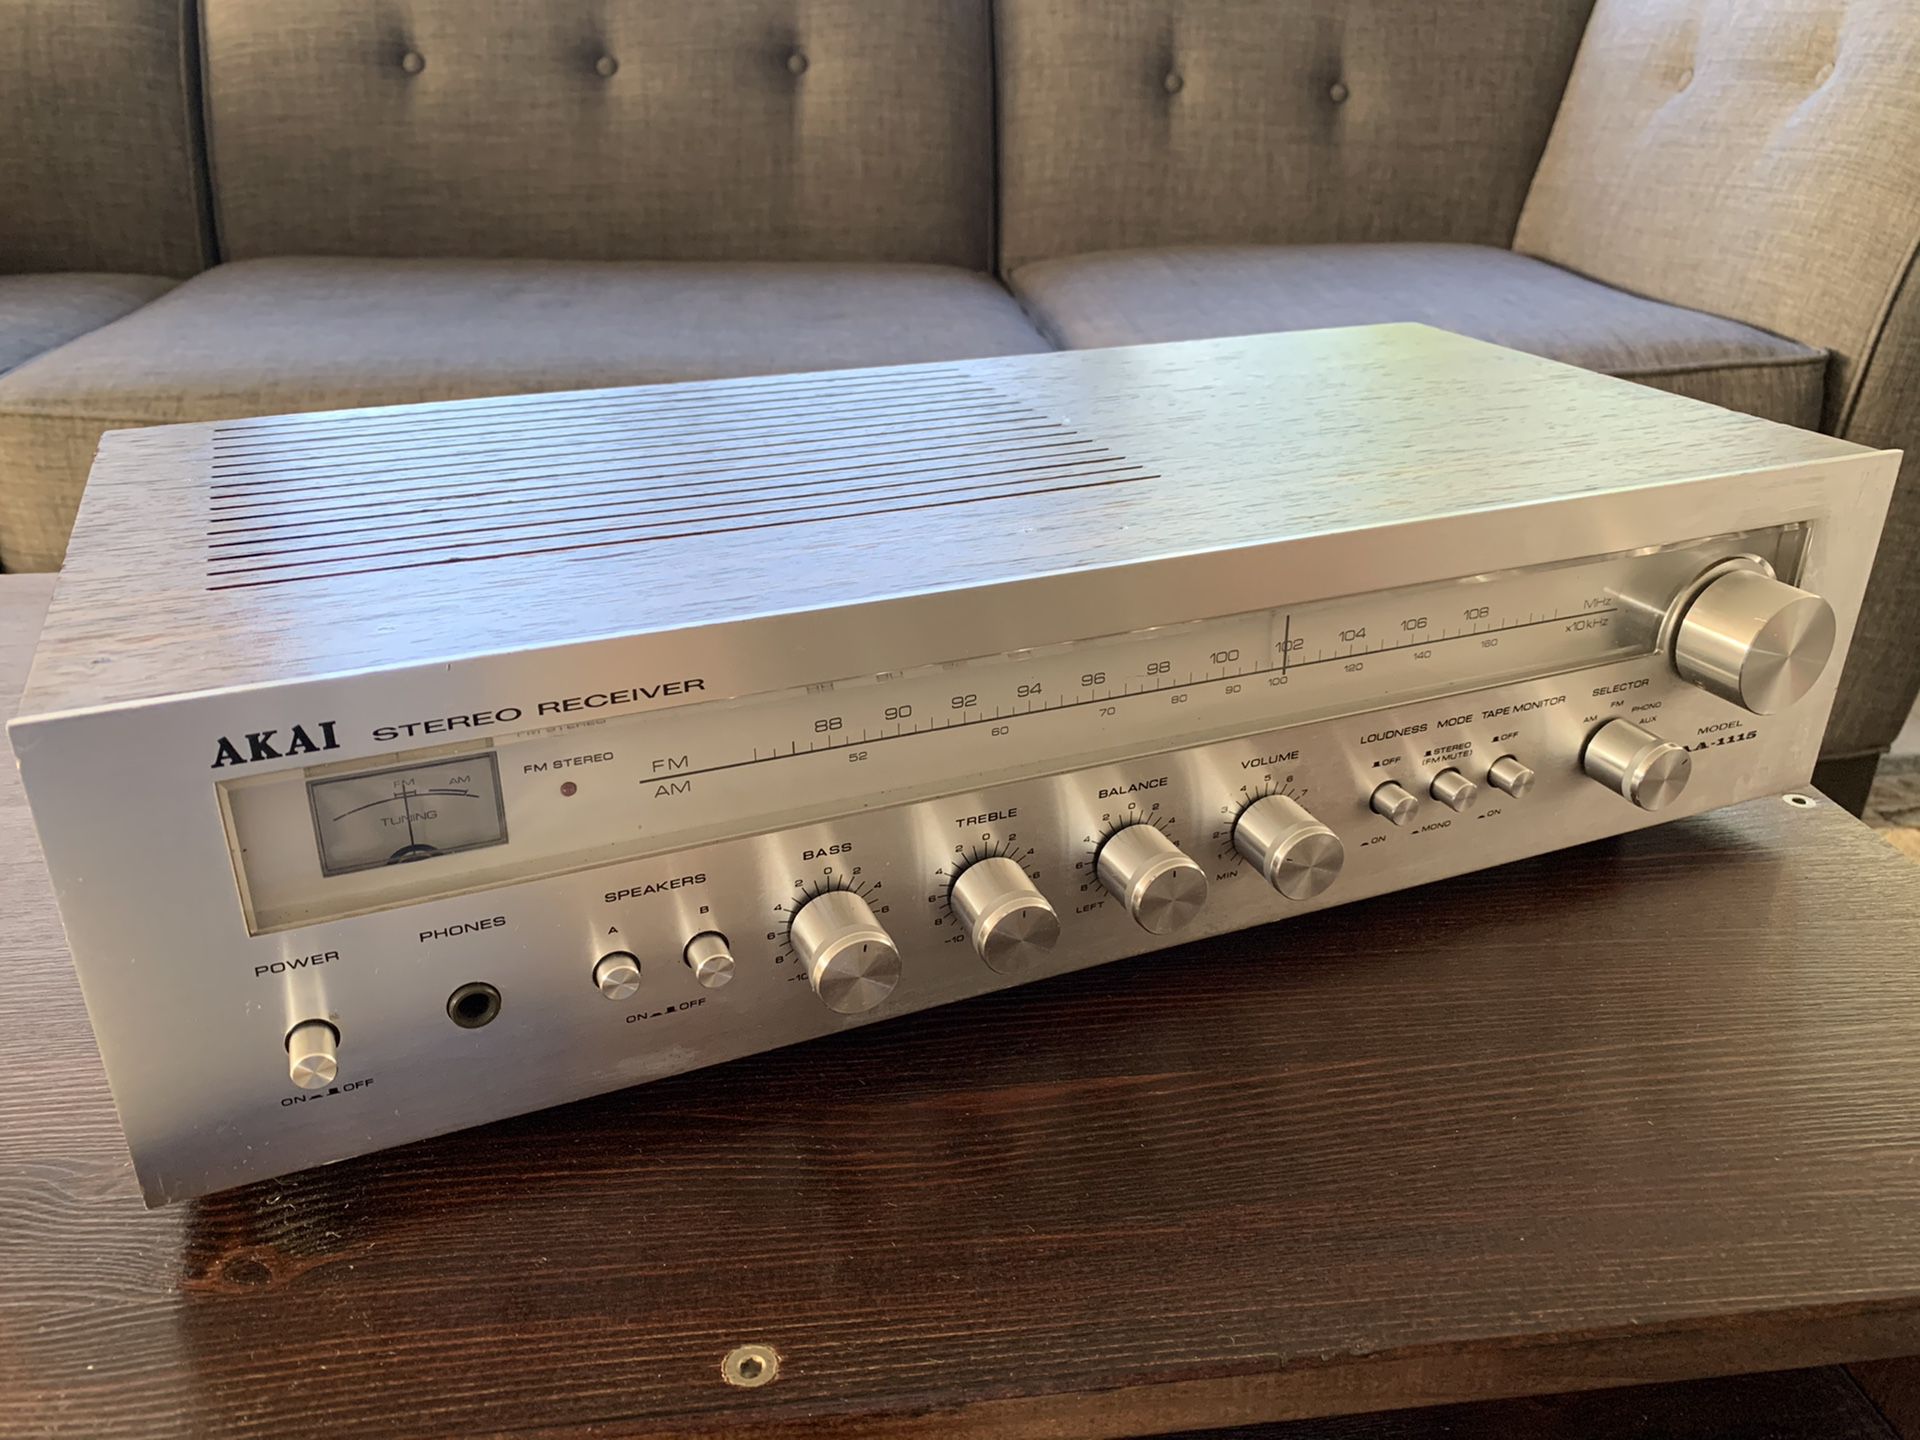 Vintage Akai AA-1115 Stereo Receiver from the late 70s. Warm sound. Fully operational